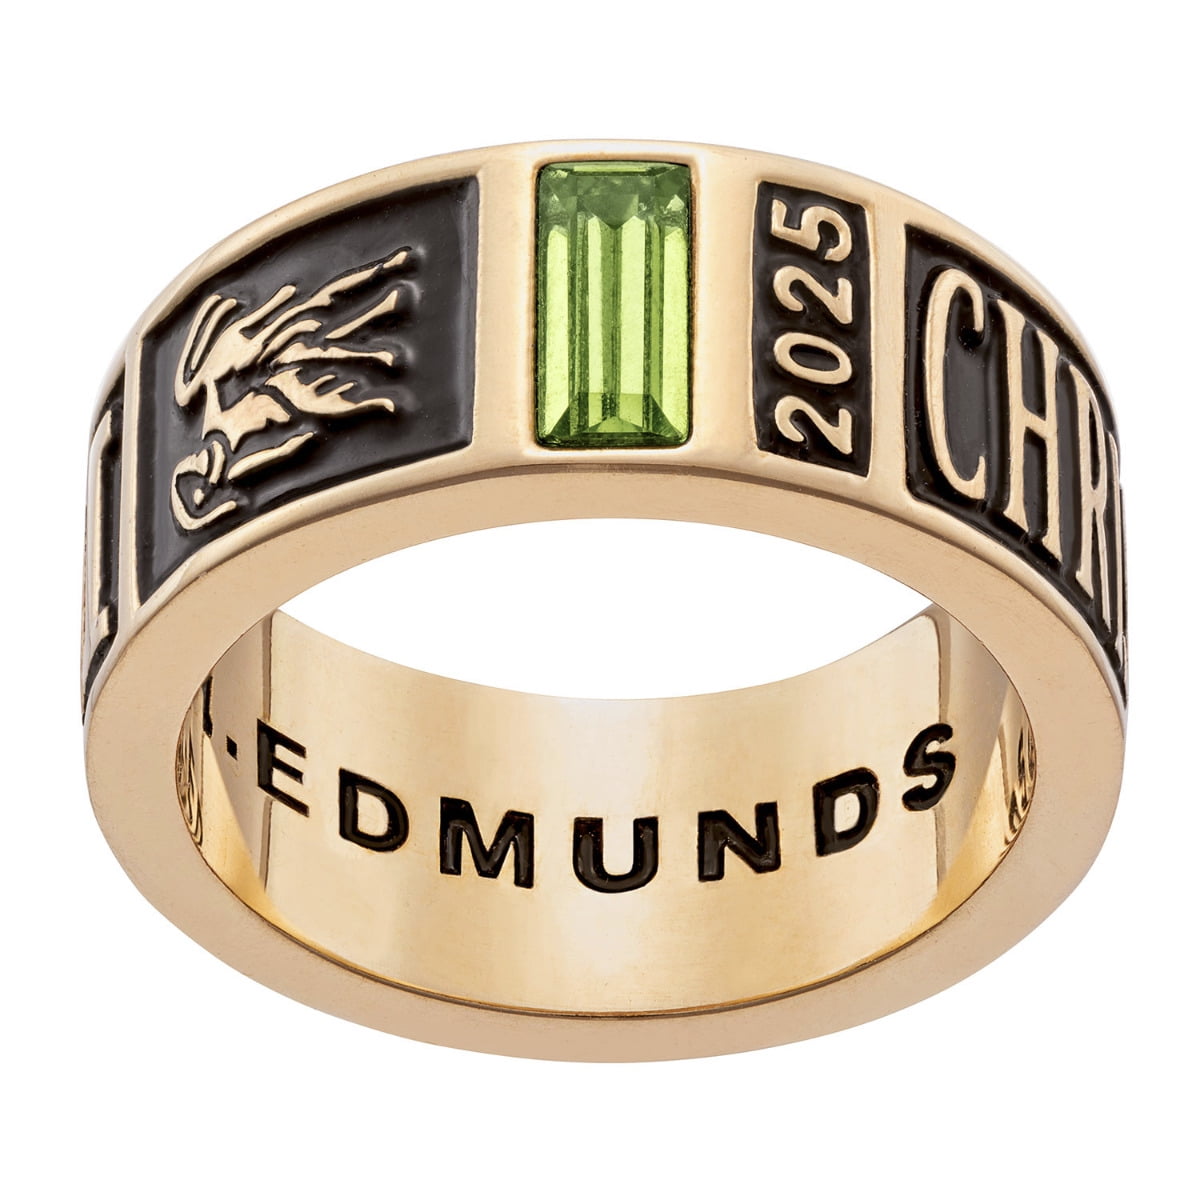 Order Now for Graduation Freestyle Men s Class Ring Sterling Silver Personalized High School or College Graduation 9fceb964 41ac 43c2 9a3a d3185a066468.5a799615d1cbb6dc0507eabcfd0bac97